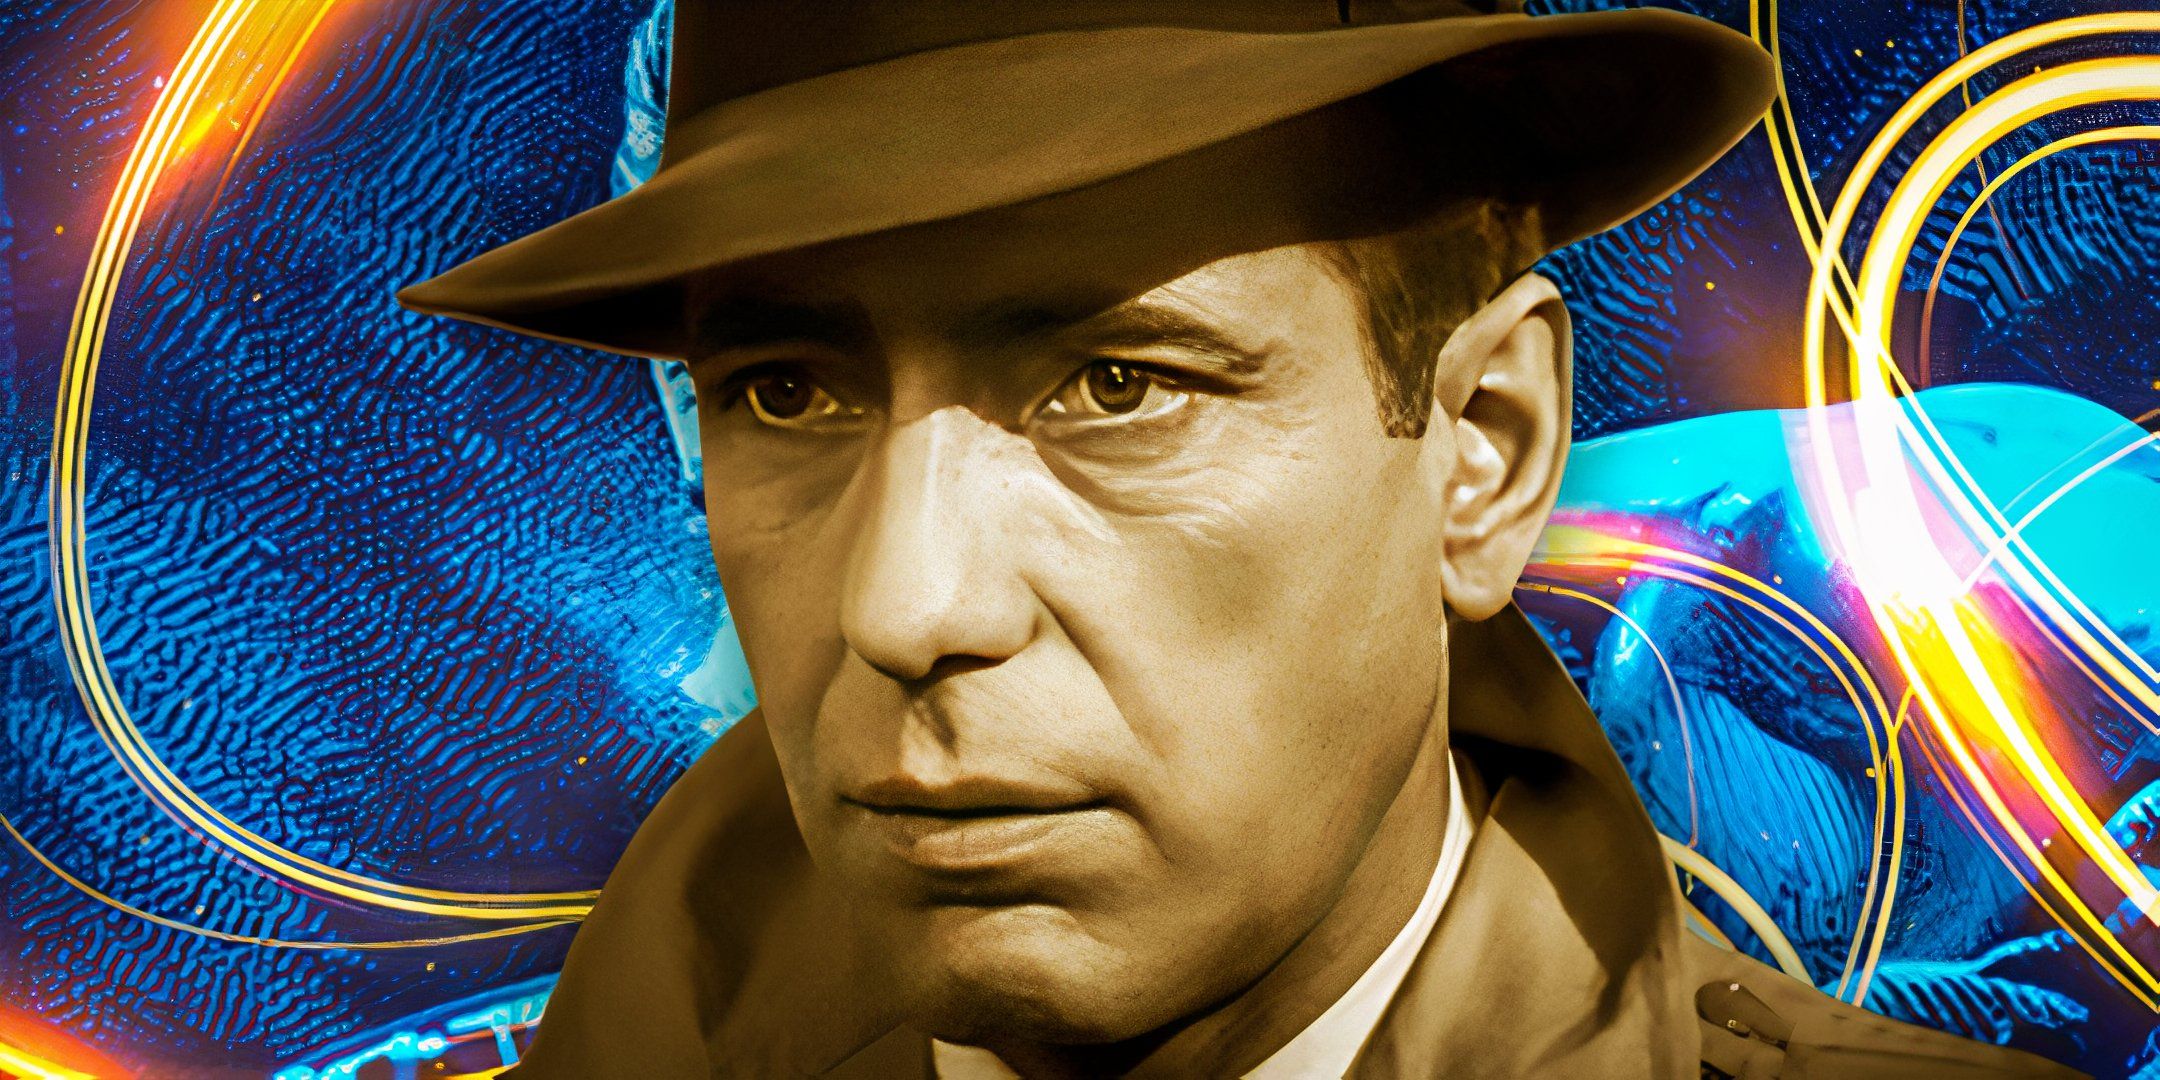 Love Casablanca? This amazing Humphrey Bogart film has almost the same cast (and its director)